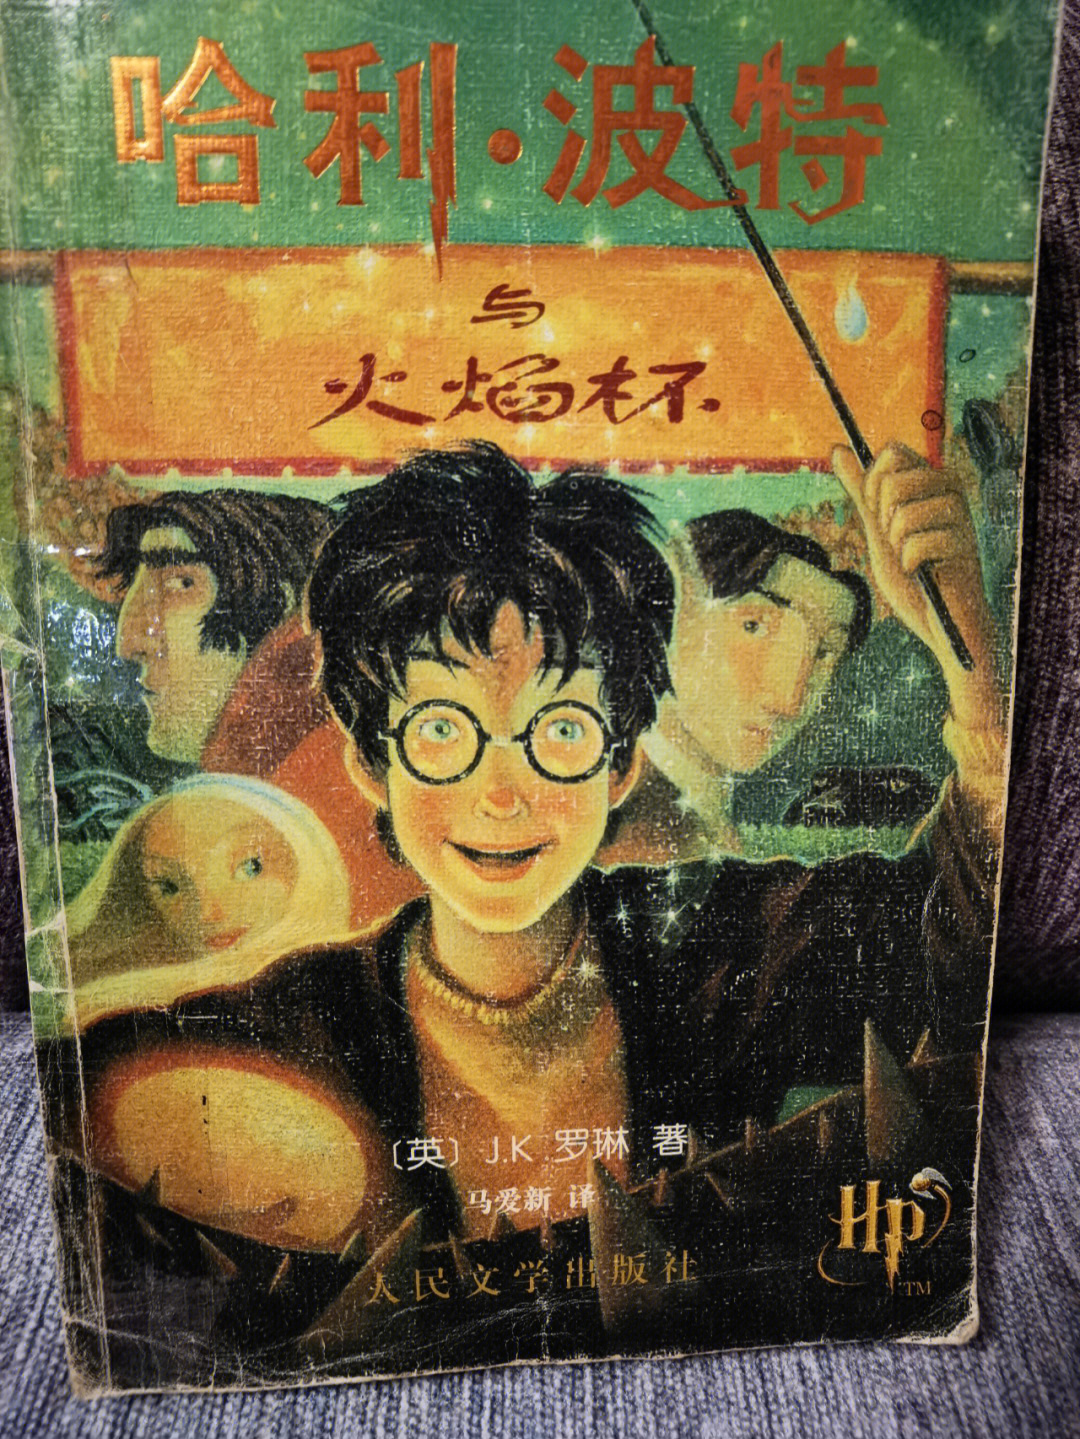 Harry Potter game Chinese version_Harry Potter game Chinese version_Harry Potter game Chinese version